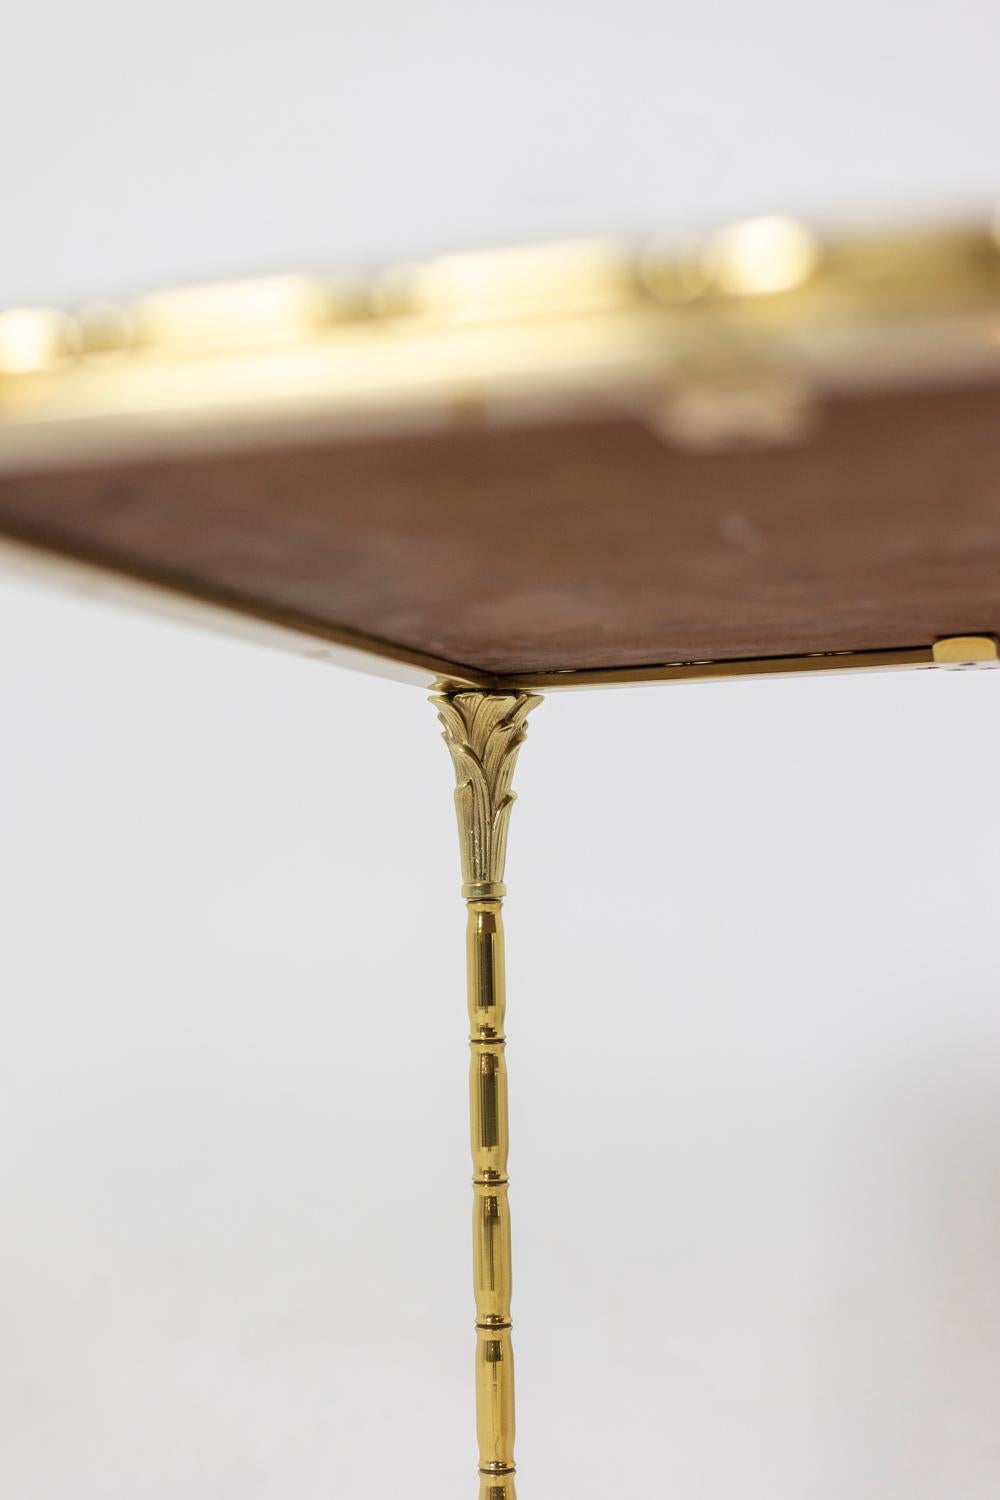 Maison Baguès, Coffee Table in Lacquer and Bronze, 1950s For Sale 4